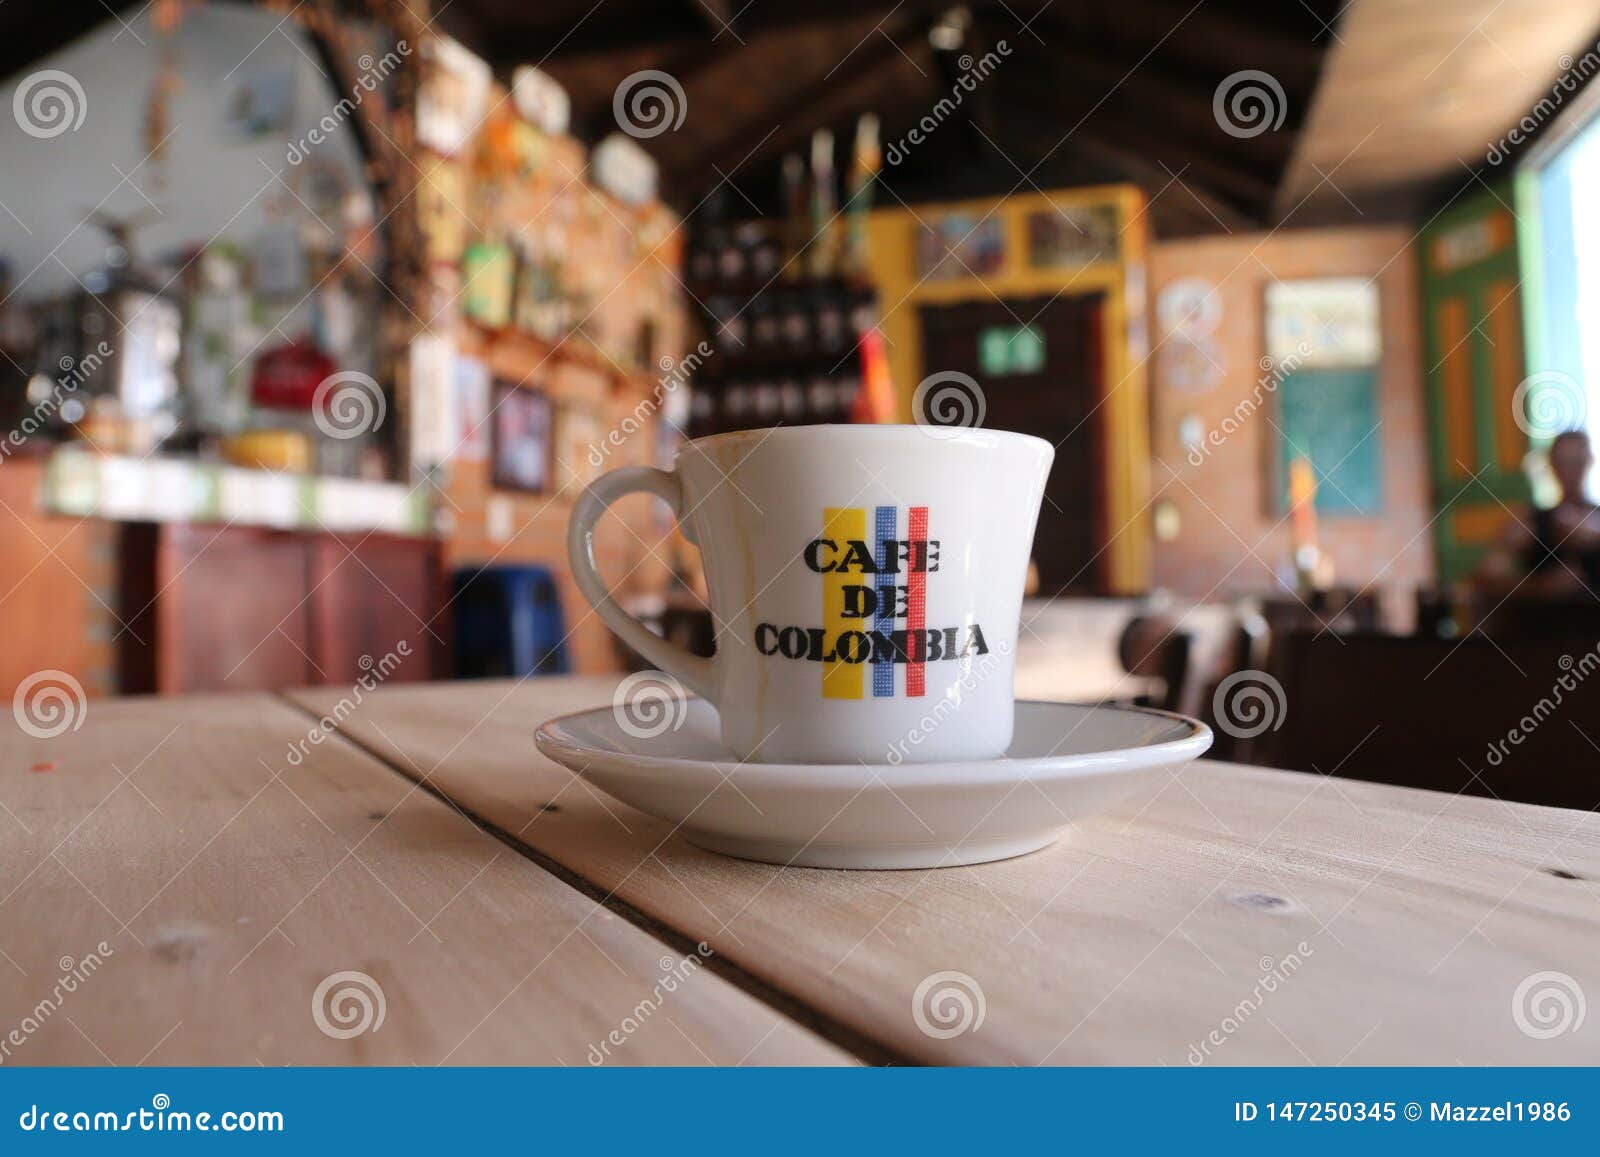 colombian coffee cup